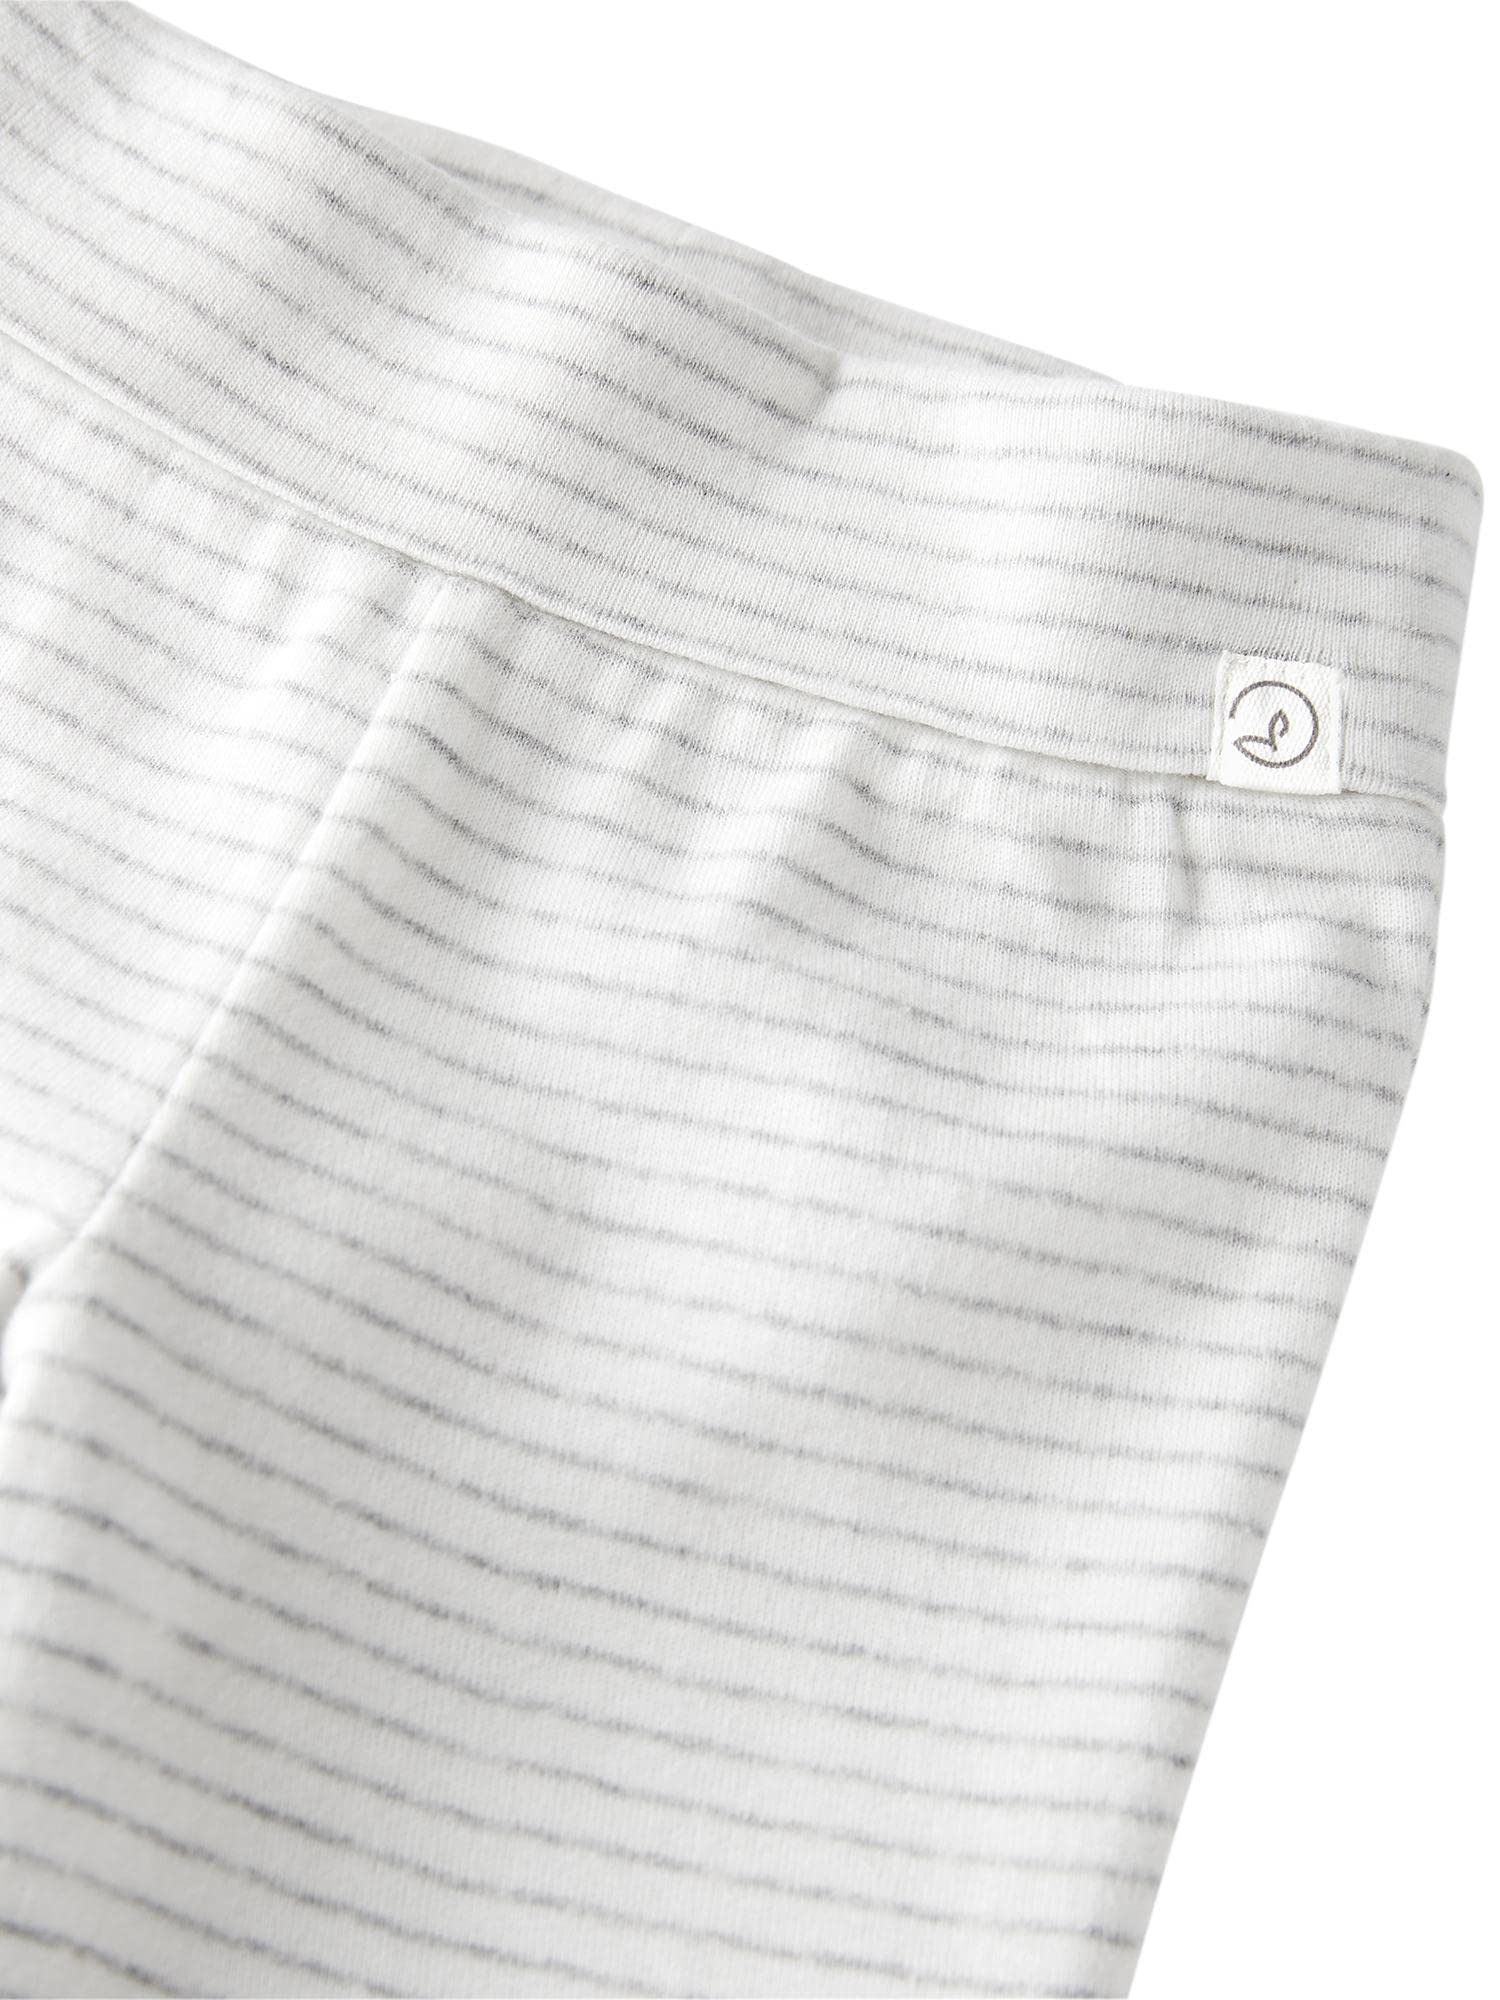 little planet by carter's Baby 2-Pack GOTS Certified Organic Cotton Pants